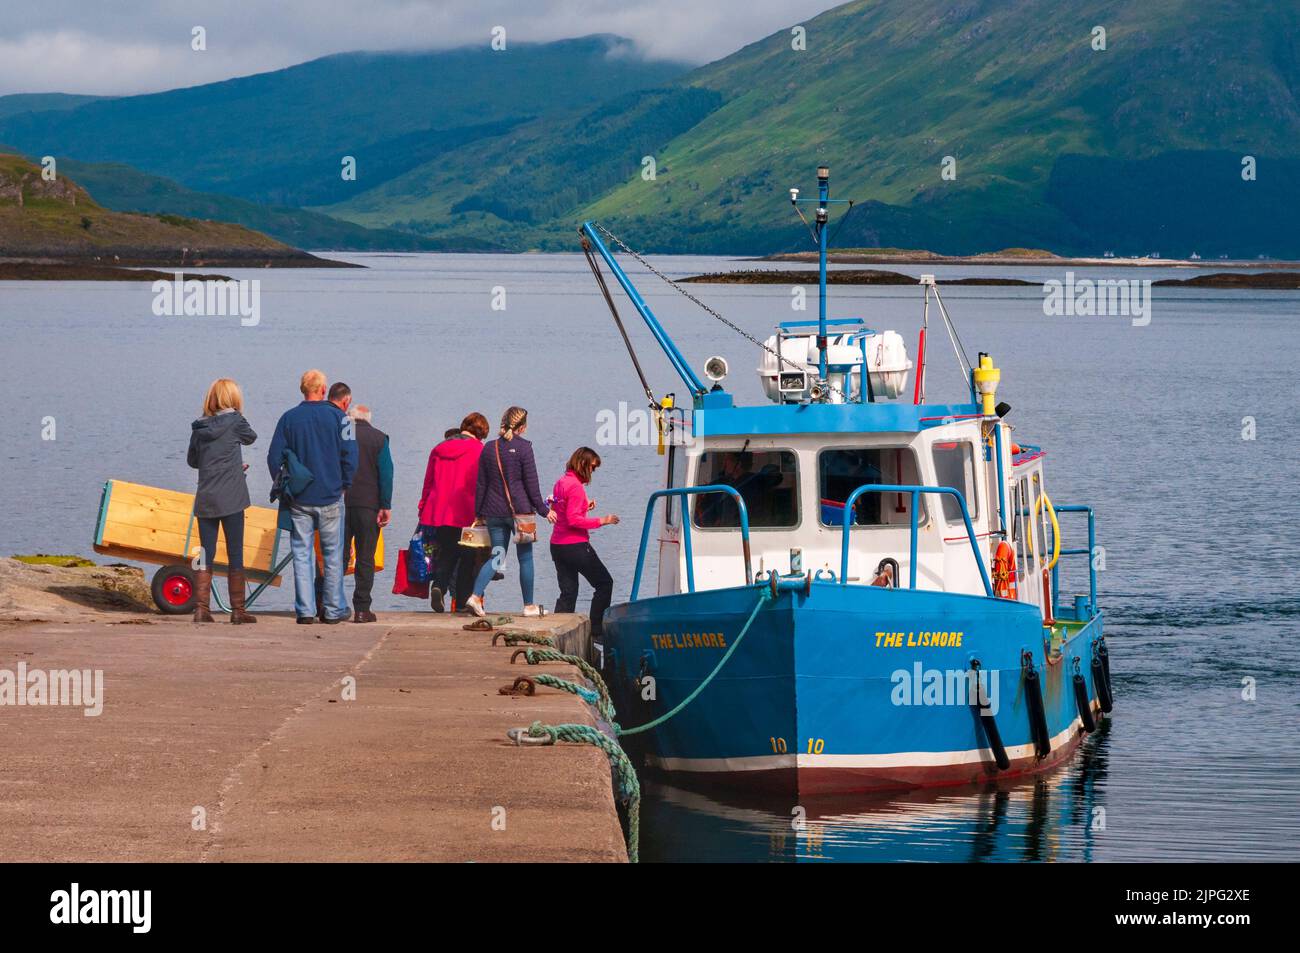 Passengers boarding a ferry at Port Appin Loch Linnhie. Argyll. Scotland. Stock Photo